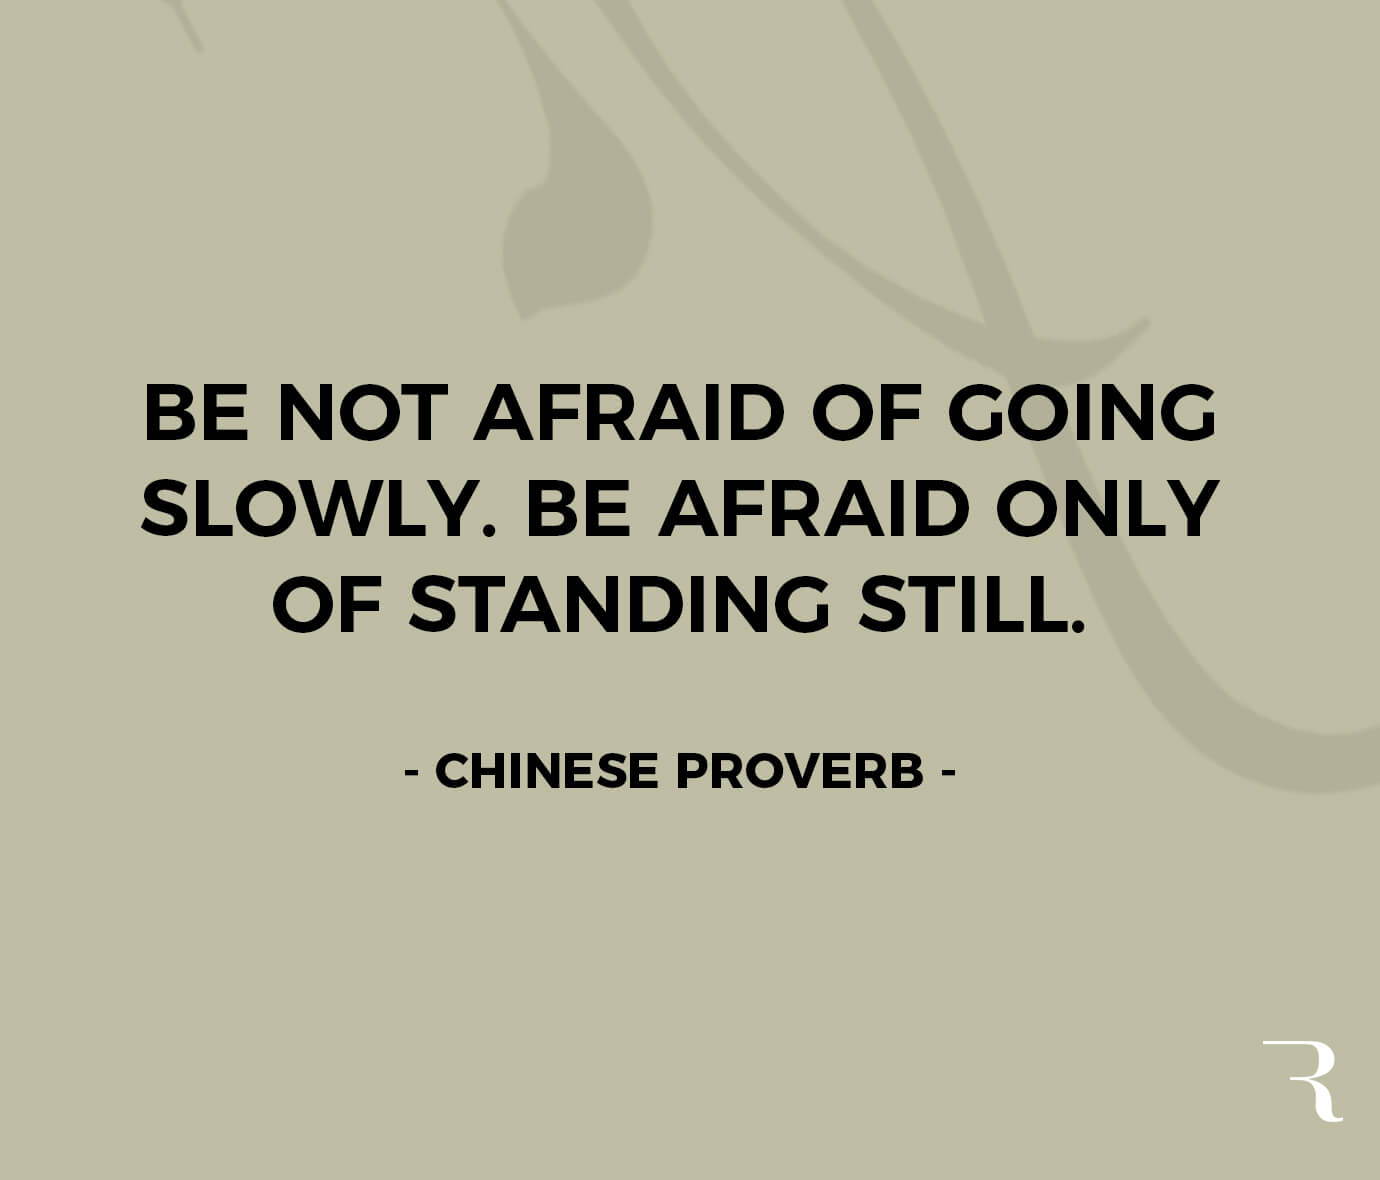 Motivational Quotes: "Be not afraid of going slowly. Be afraid only of standing still." 112 Motivational Quotes to Be a Better Entrepreneur